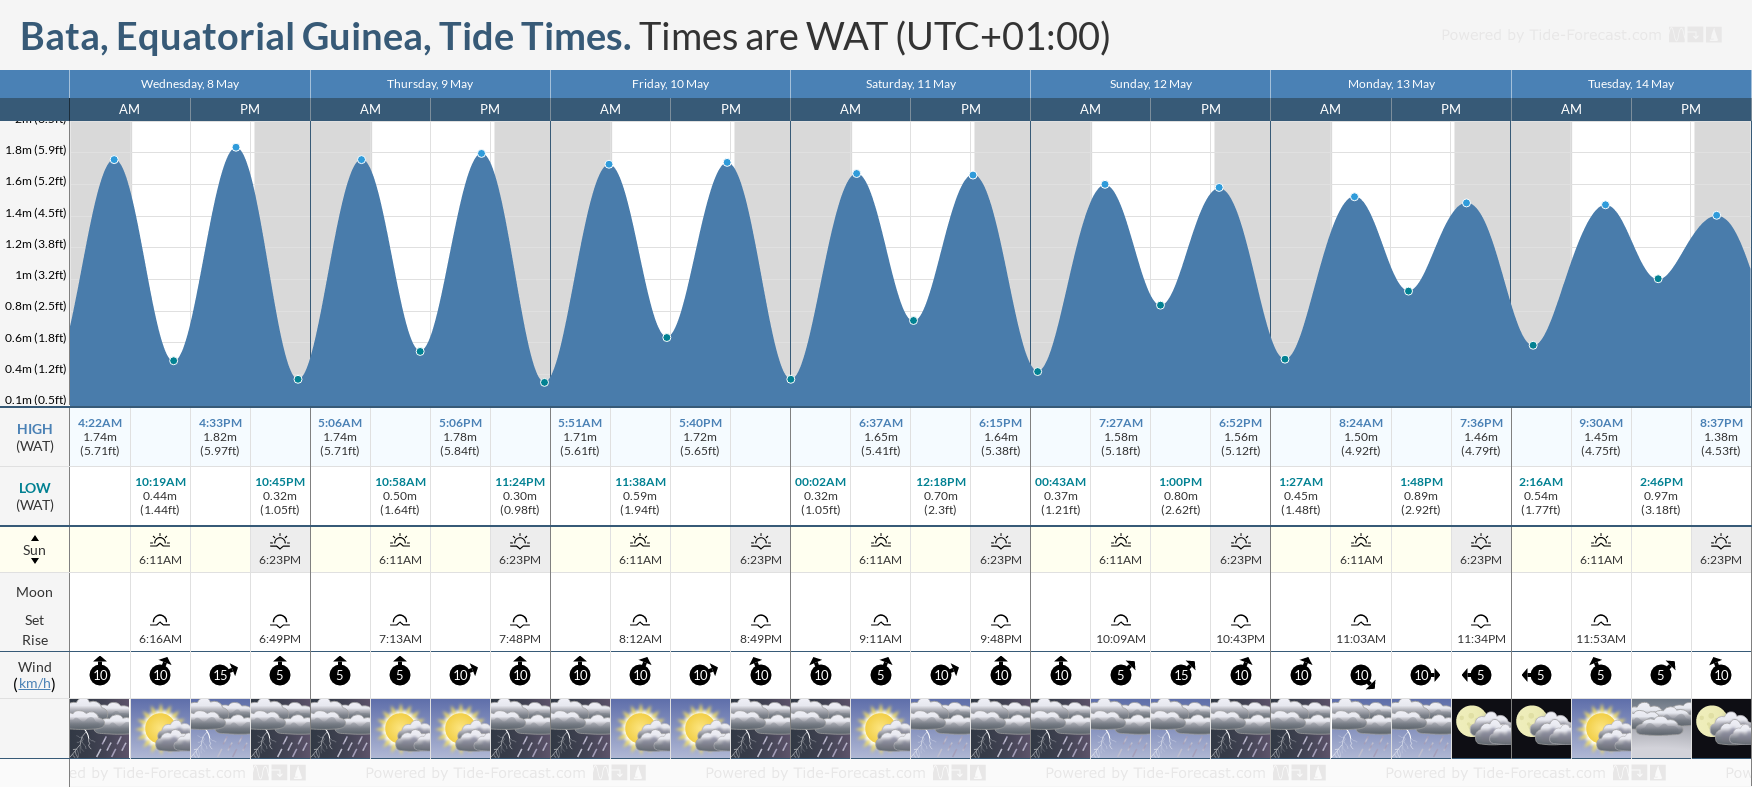 Bata, Equatorial Guinea Tide Chart including high and low tide tide times for the next 7 days